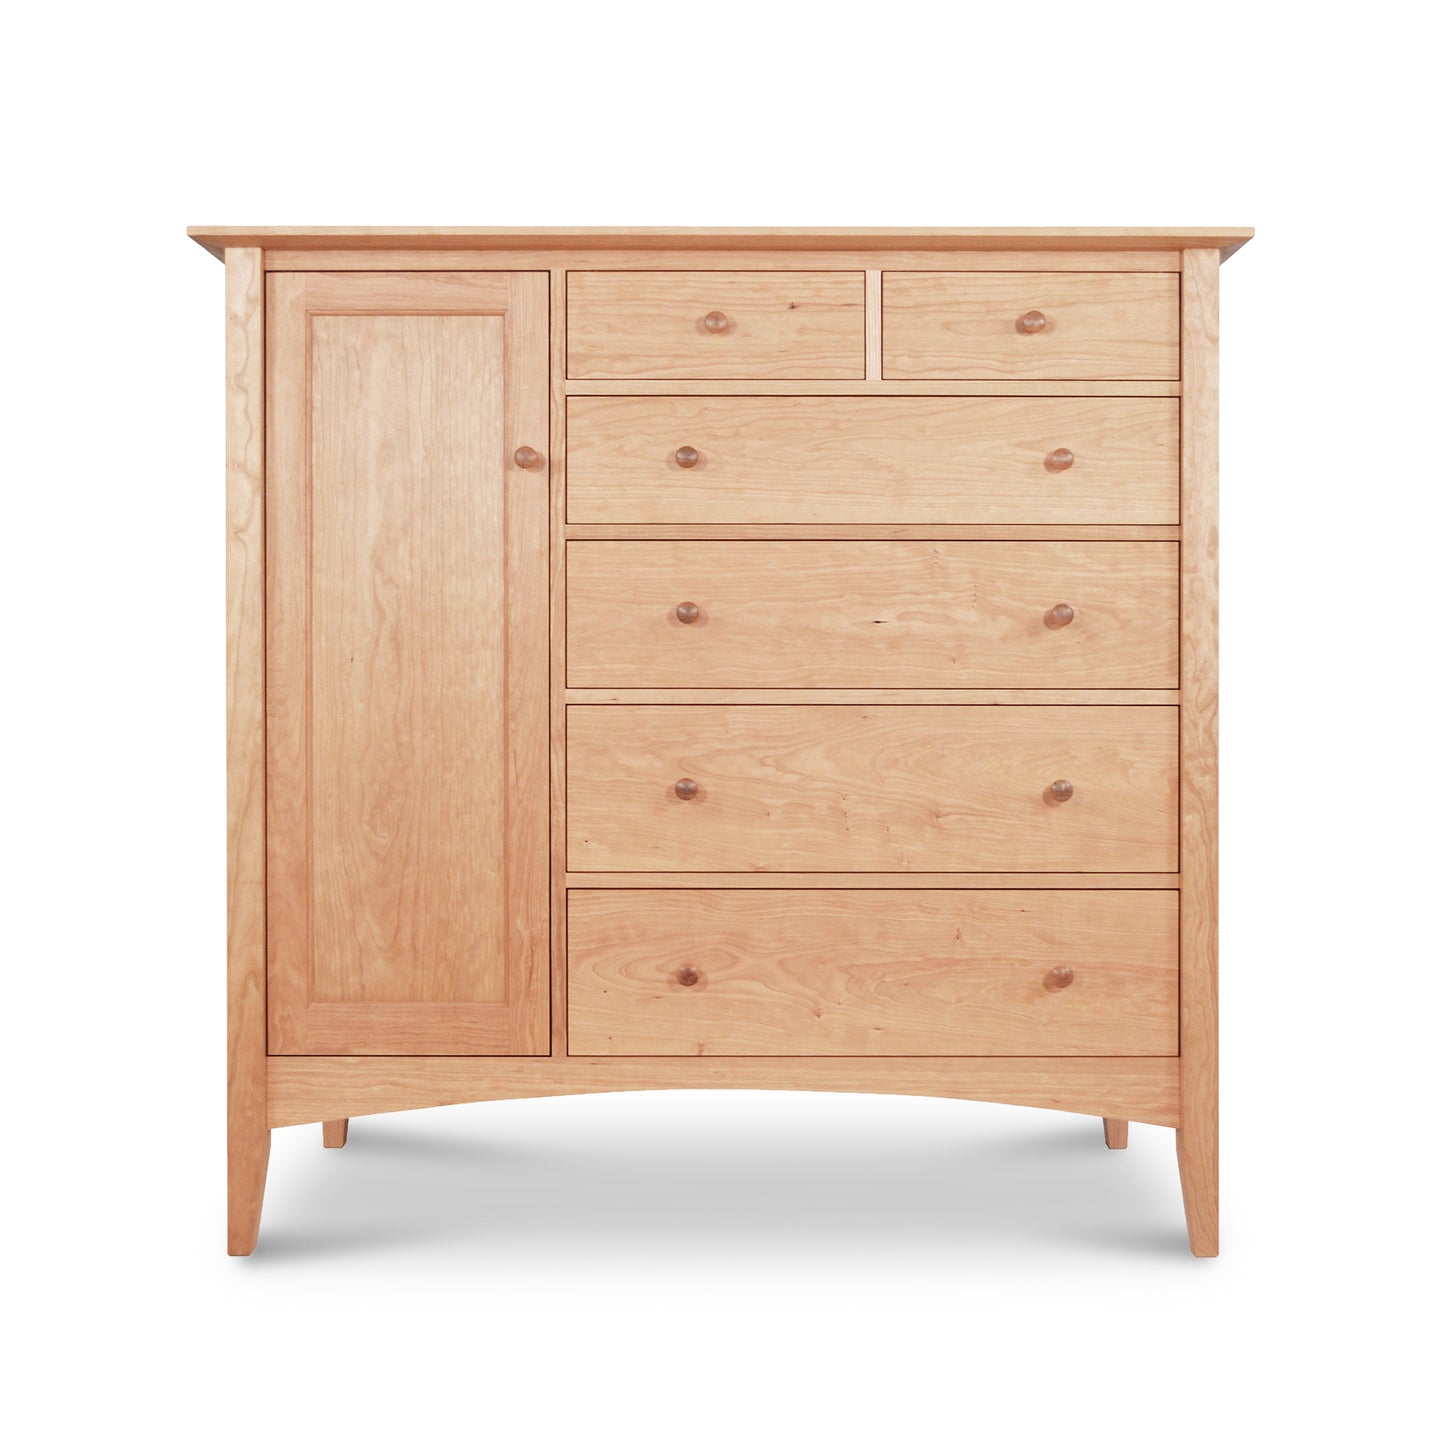 A Maple Corner Woodworks American Shaker Gent's Chest with a combination of drawers and a single cabinet door, on a white background.